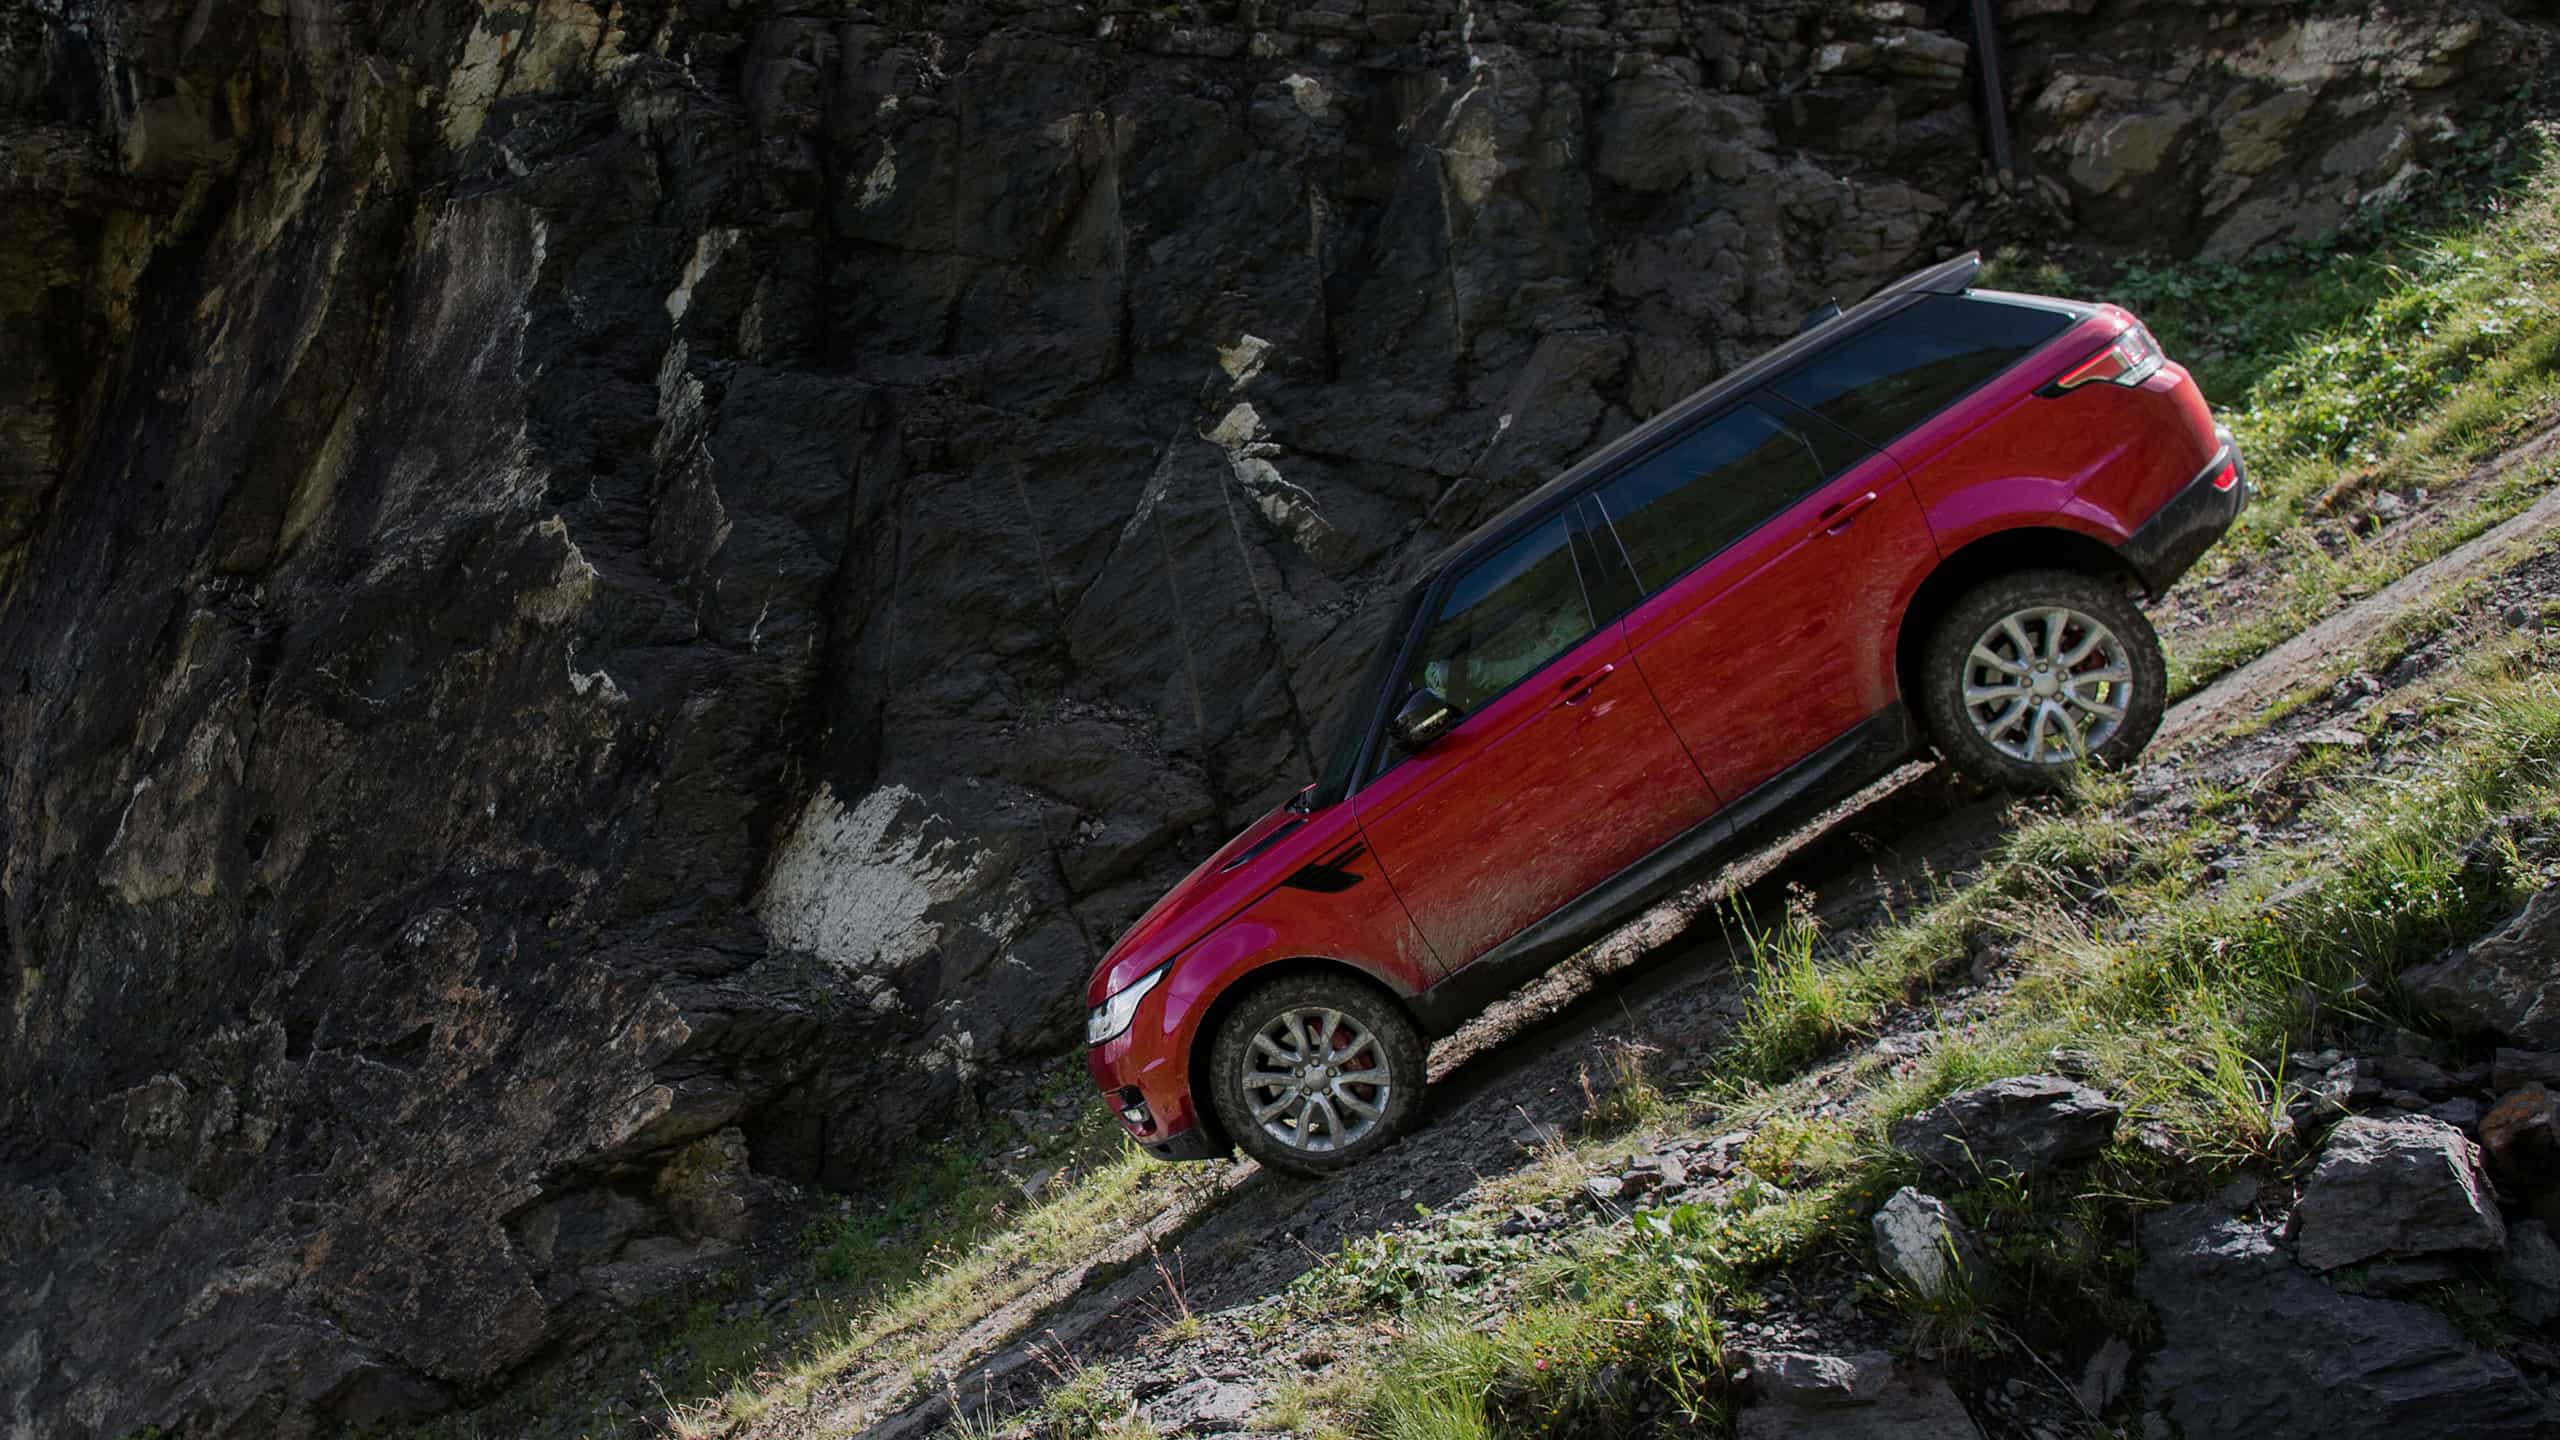 Range Rover Sport moving down on Hilly Mountain Road